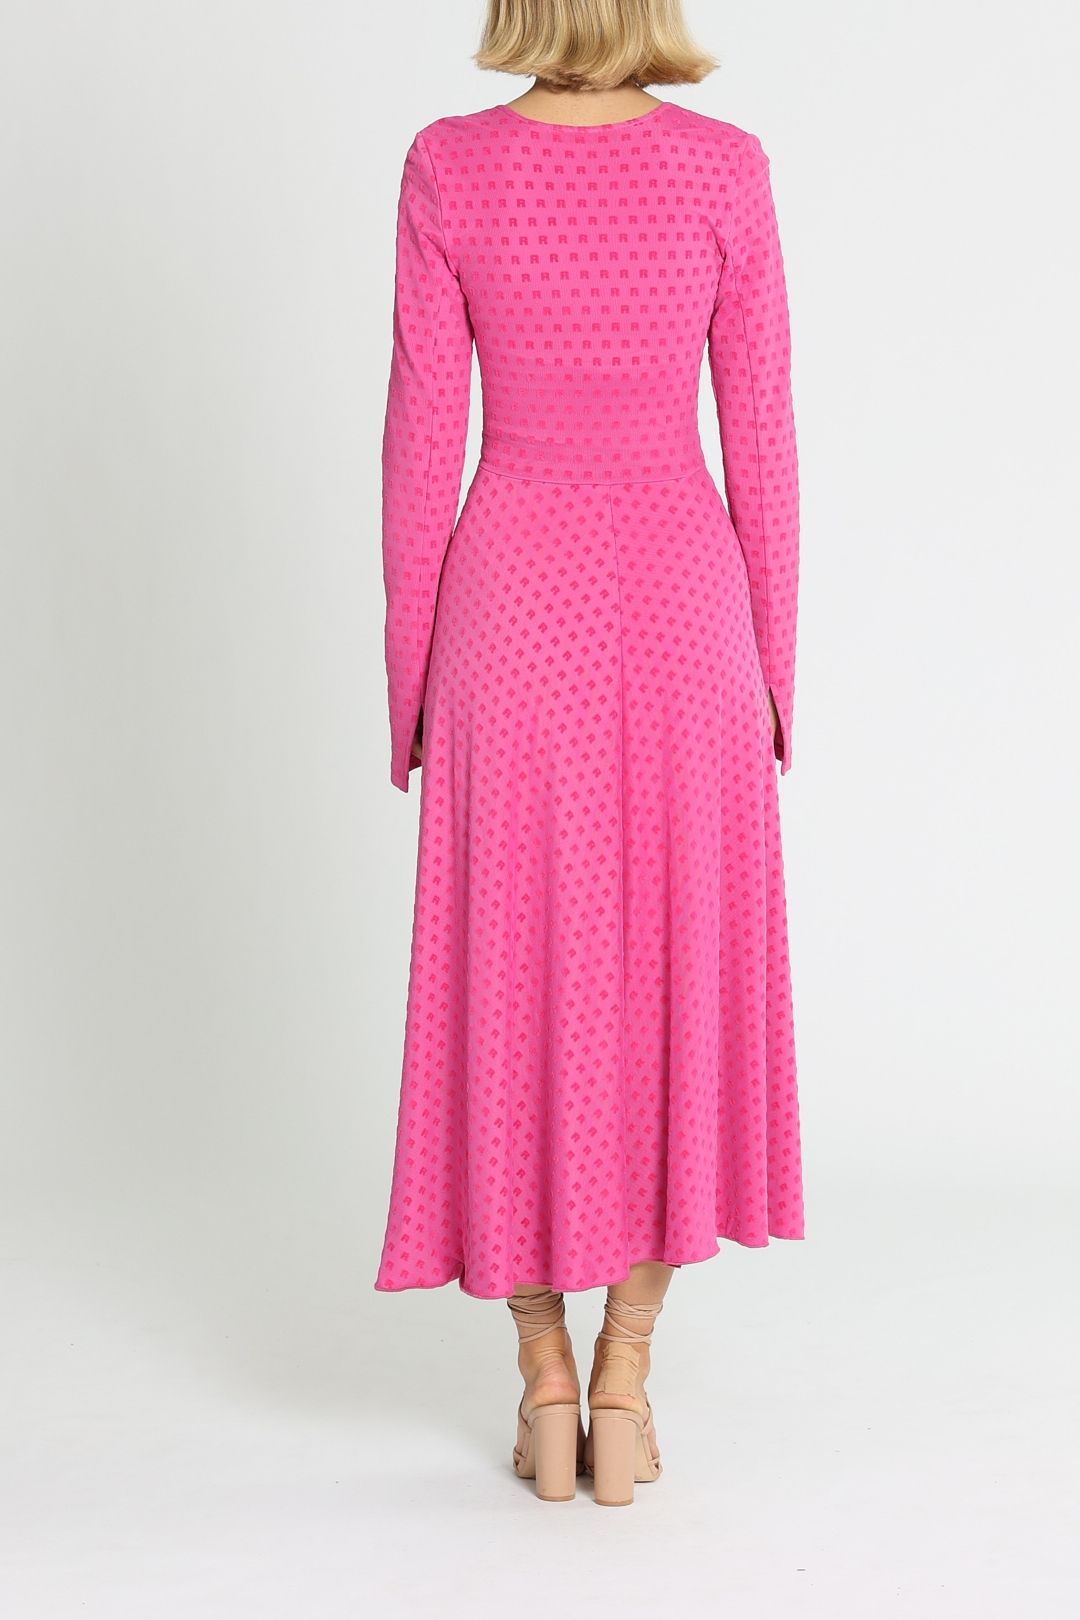 Rotate By Birger Christensen Kamla Rose Violet Dress Fit and Flare